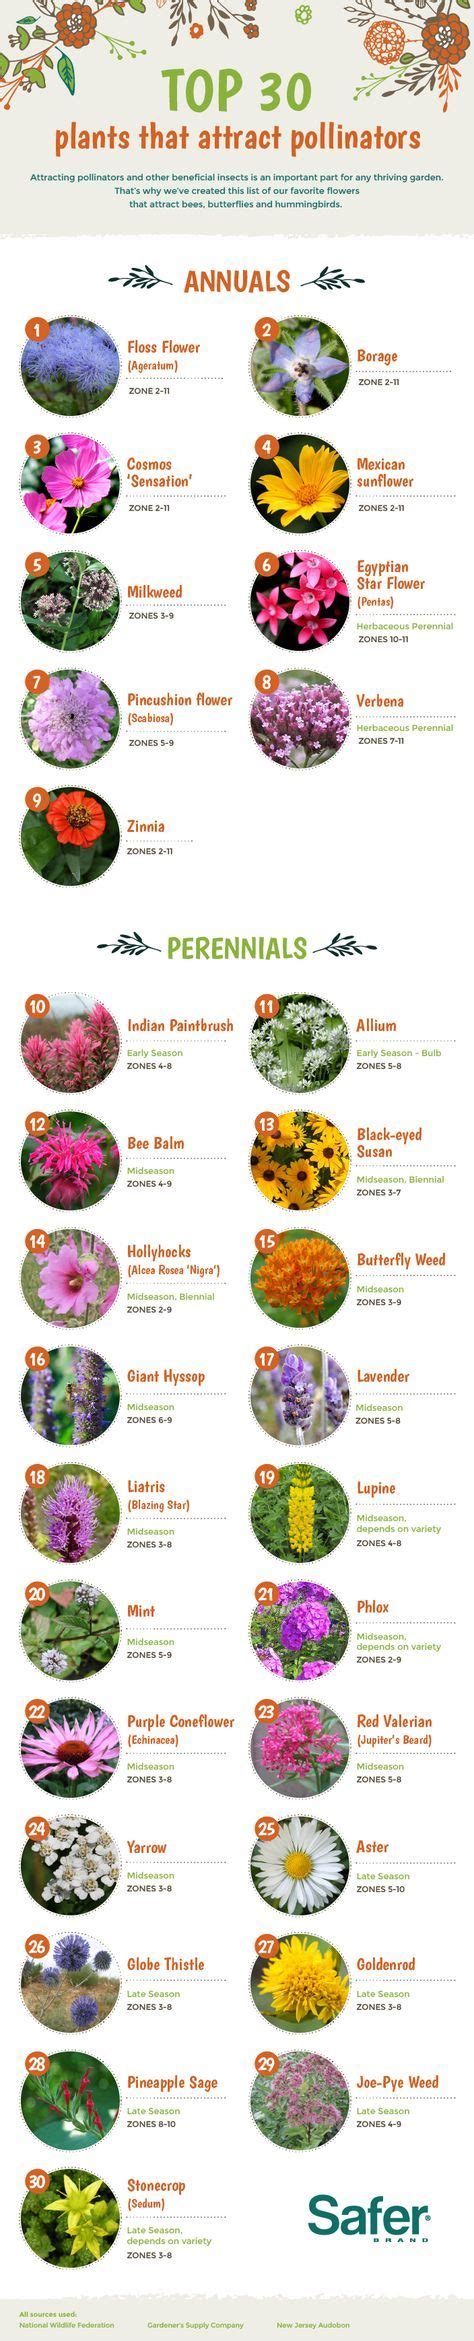 Butterflies typically visit flowers that are: Top 30 Plants That Attract Pollinators | Pollinator plants ...